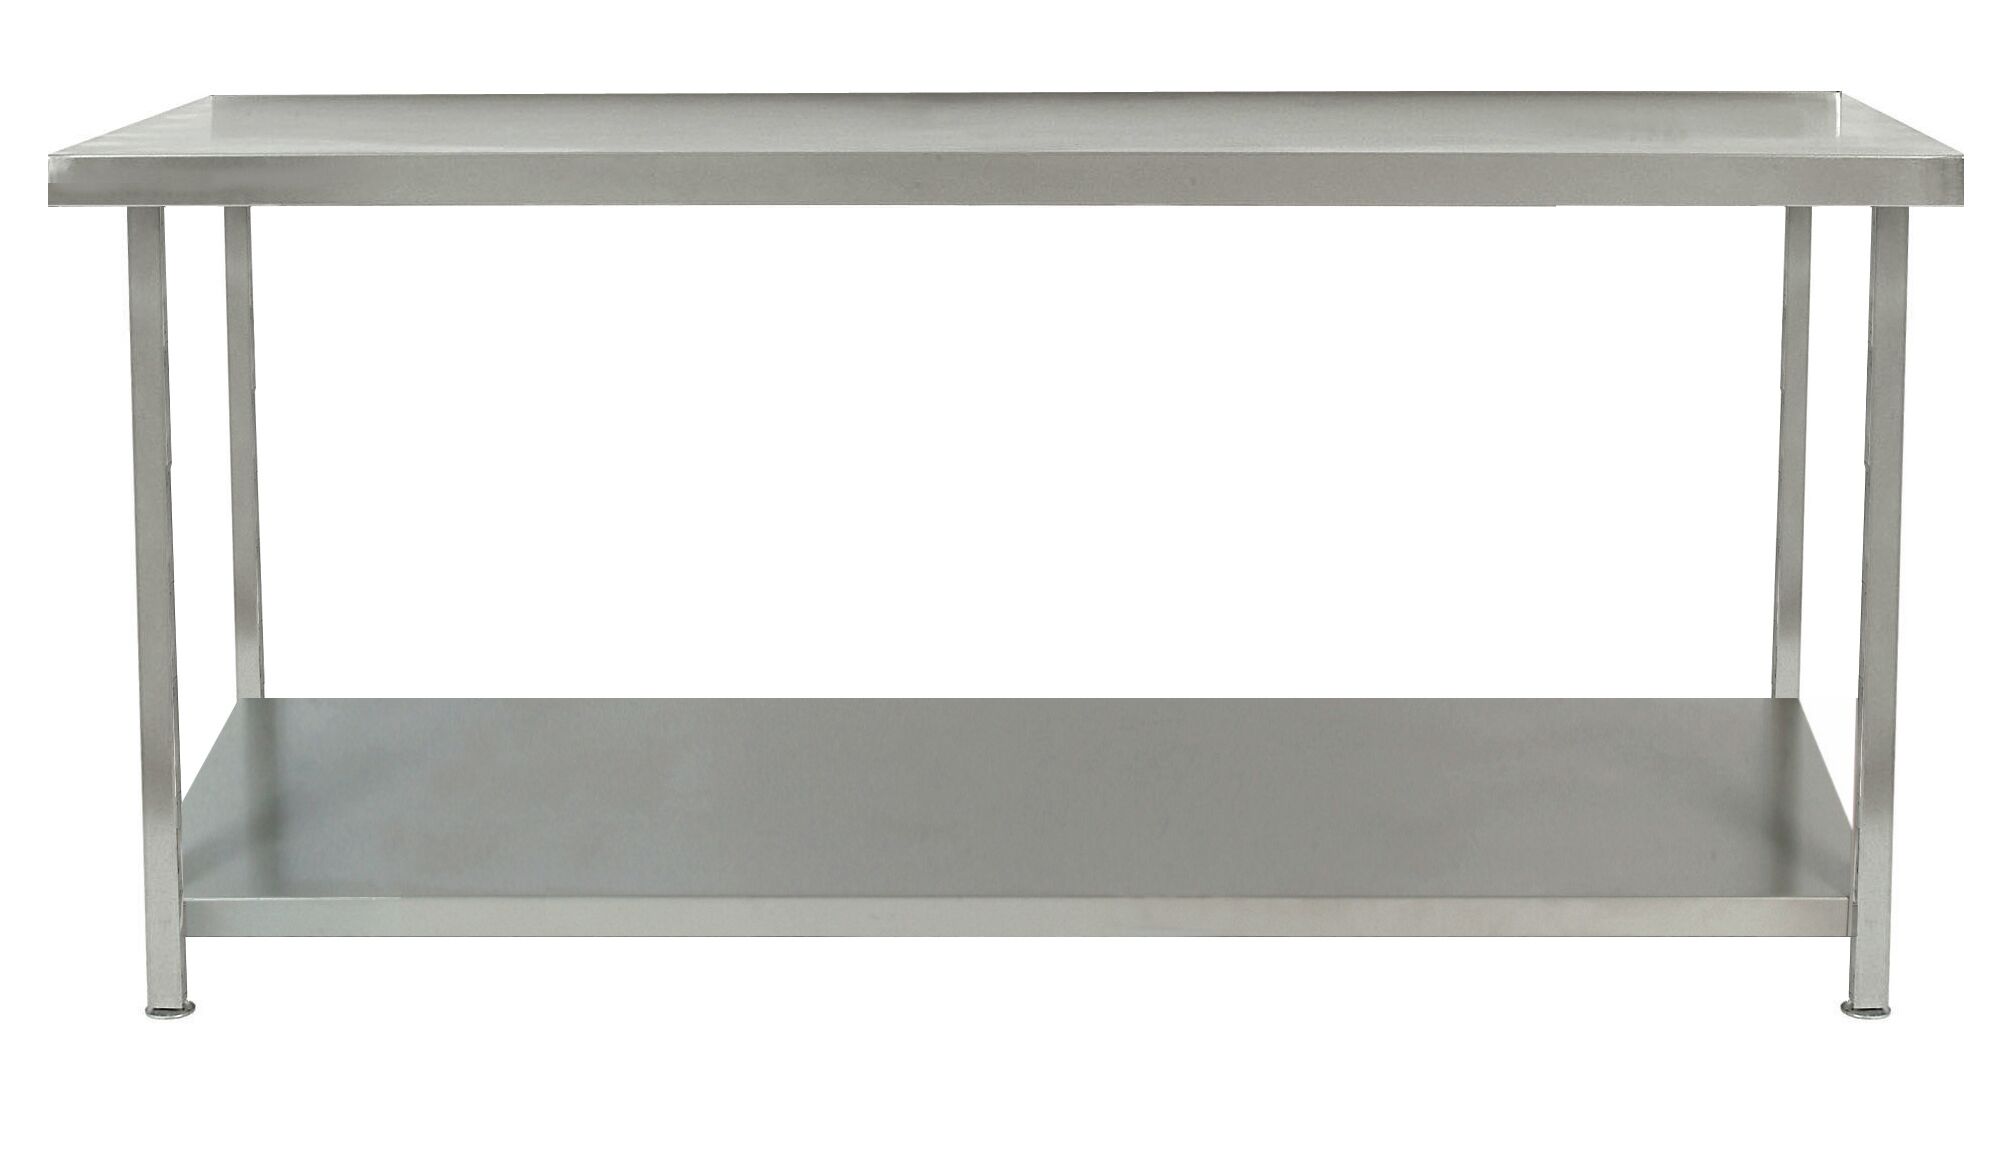 Parry TAB - Stainless Steel Tables With One Undershelf